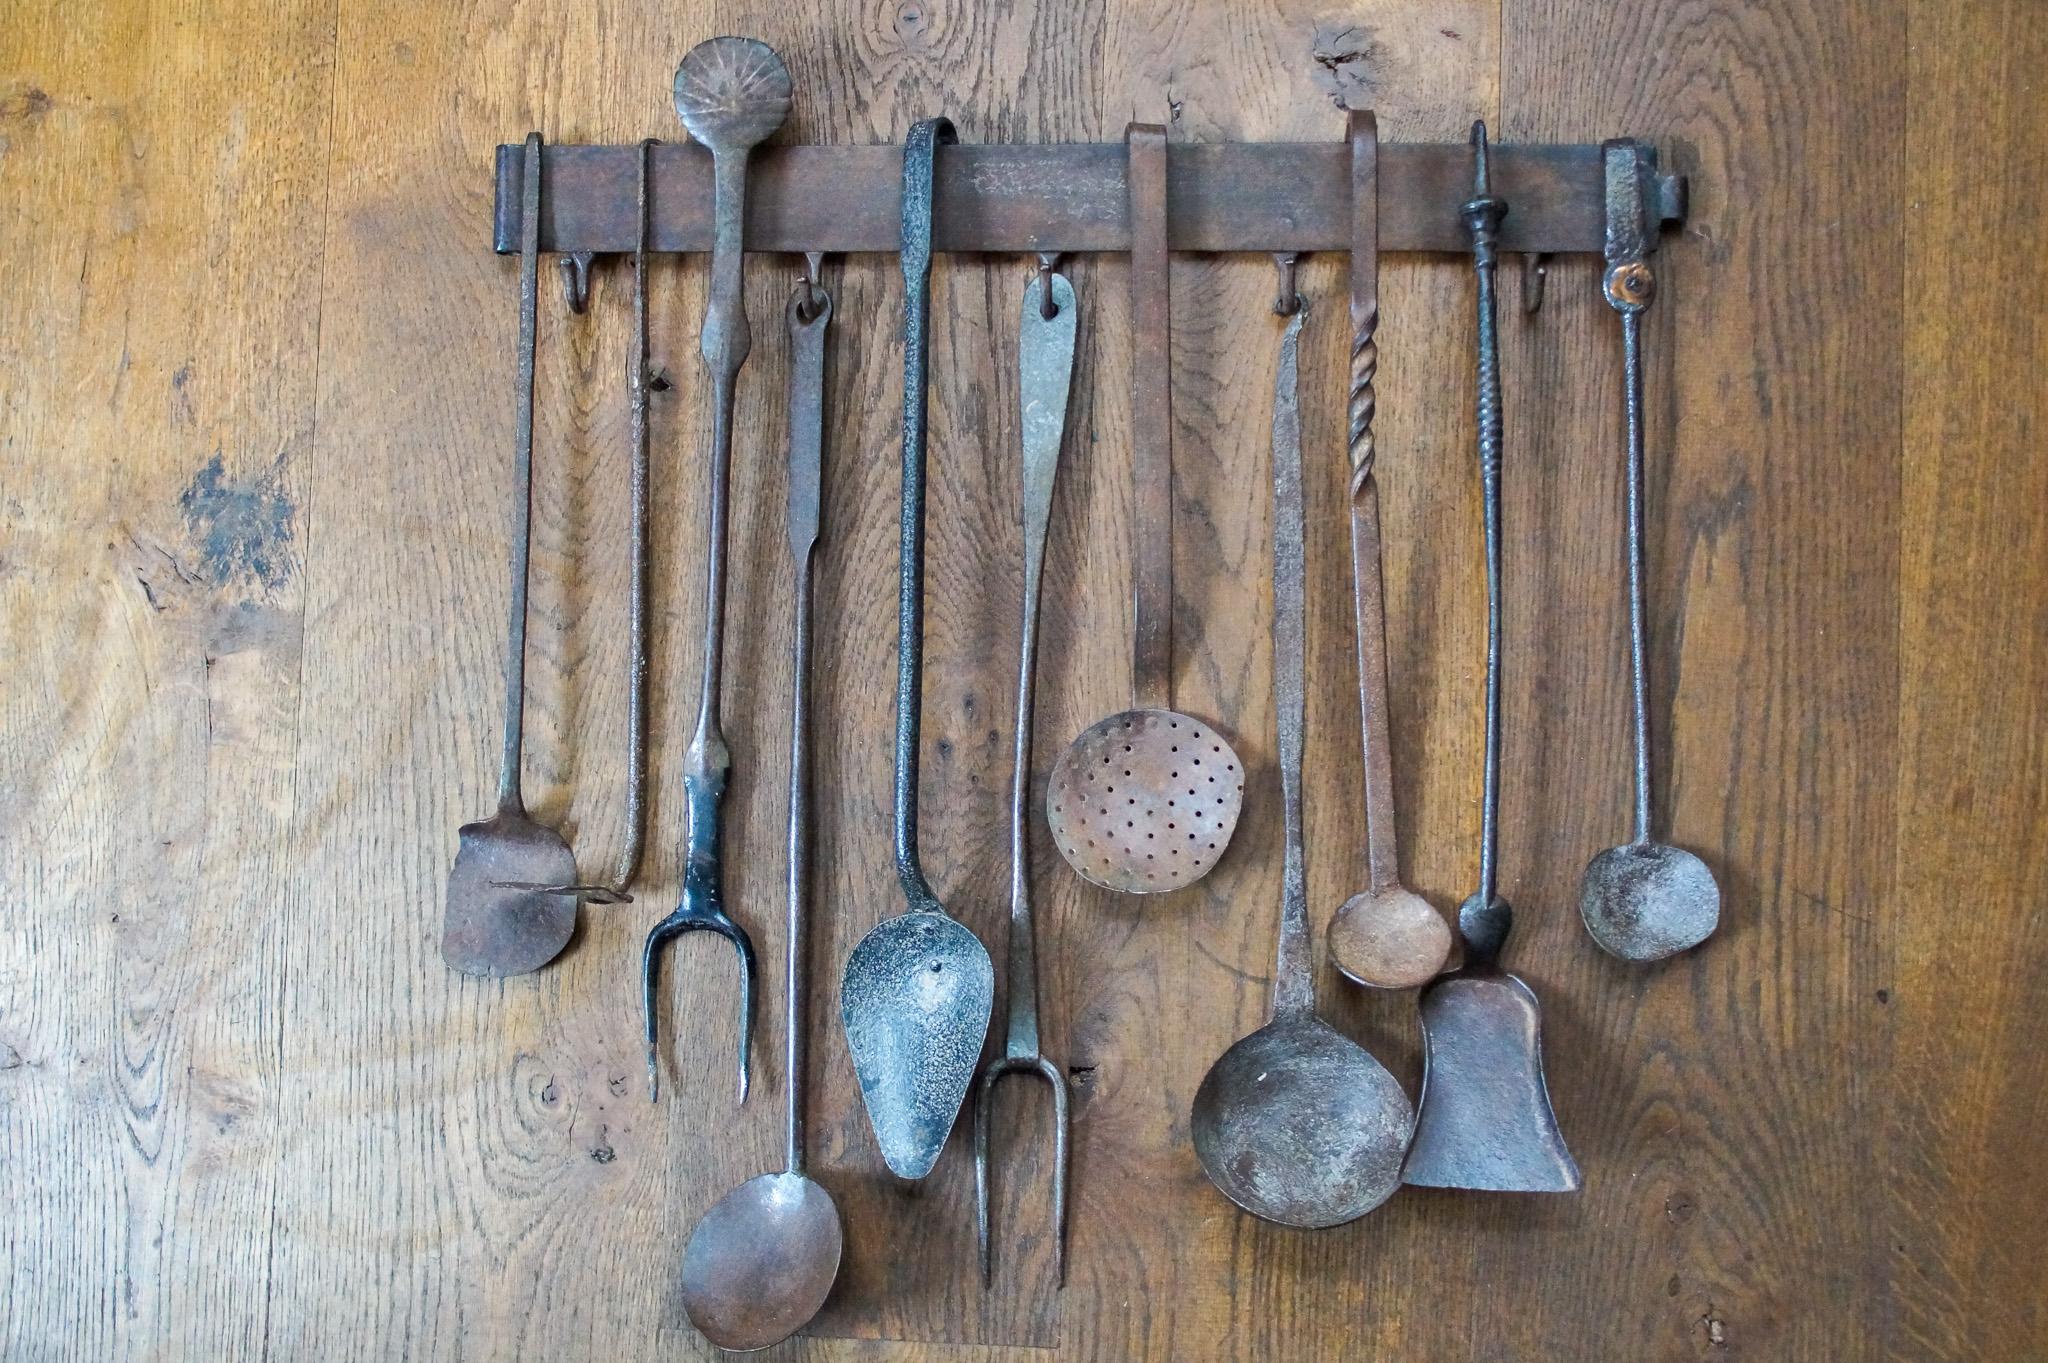 18th - 19th century Dutch neoclassical fireplace tool set consisting of two tasting forks (of which one decorated), 5 spoons, a poke, a shovel, a spatula, several spoons (of which one is decorated) and a hanger. The set is also made of wrought iron